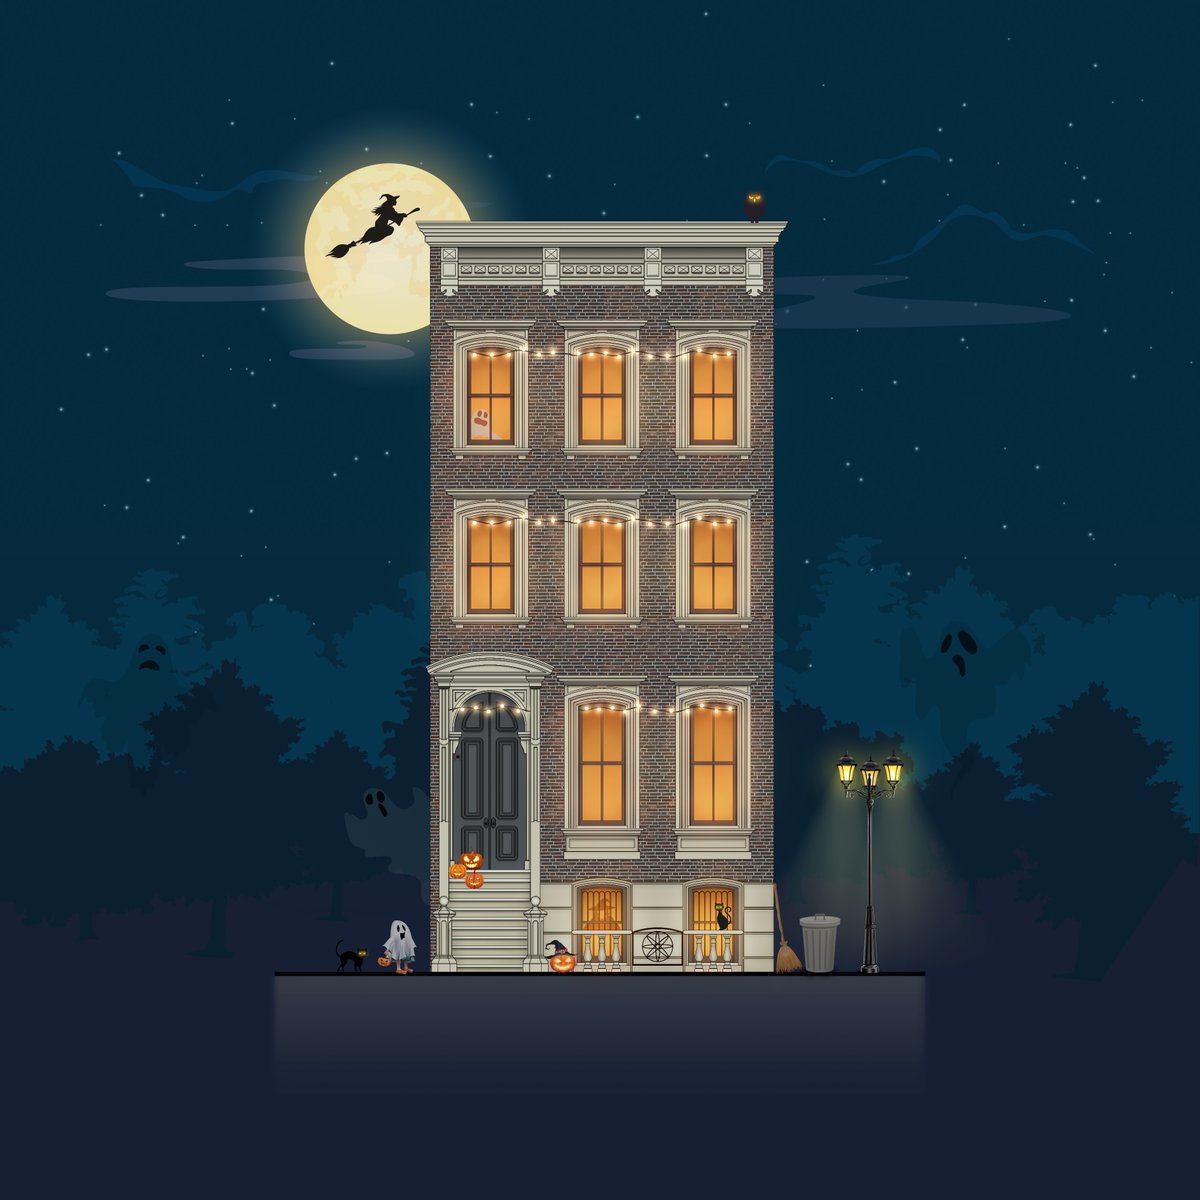 🌠MY NEW DROP🌠

▪️|Halloween House| from collection |Flâner|
▪️1/1
▪️9.7 $XTZ
▪️objkt.com/asset/KT1PBcMa…

This house has been lovingly decorated with
Halloween-themed décor to spread
some spooky cheer👻🎃 🌕🦉

#NFTCommuntiy #NFTs #Halloween 
#objktcom #HalloweenHouse #tezosnft